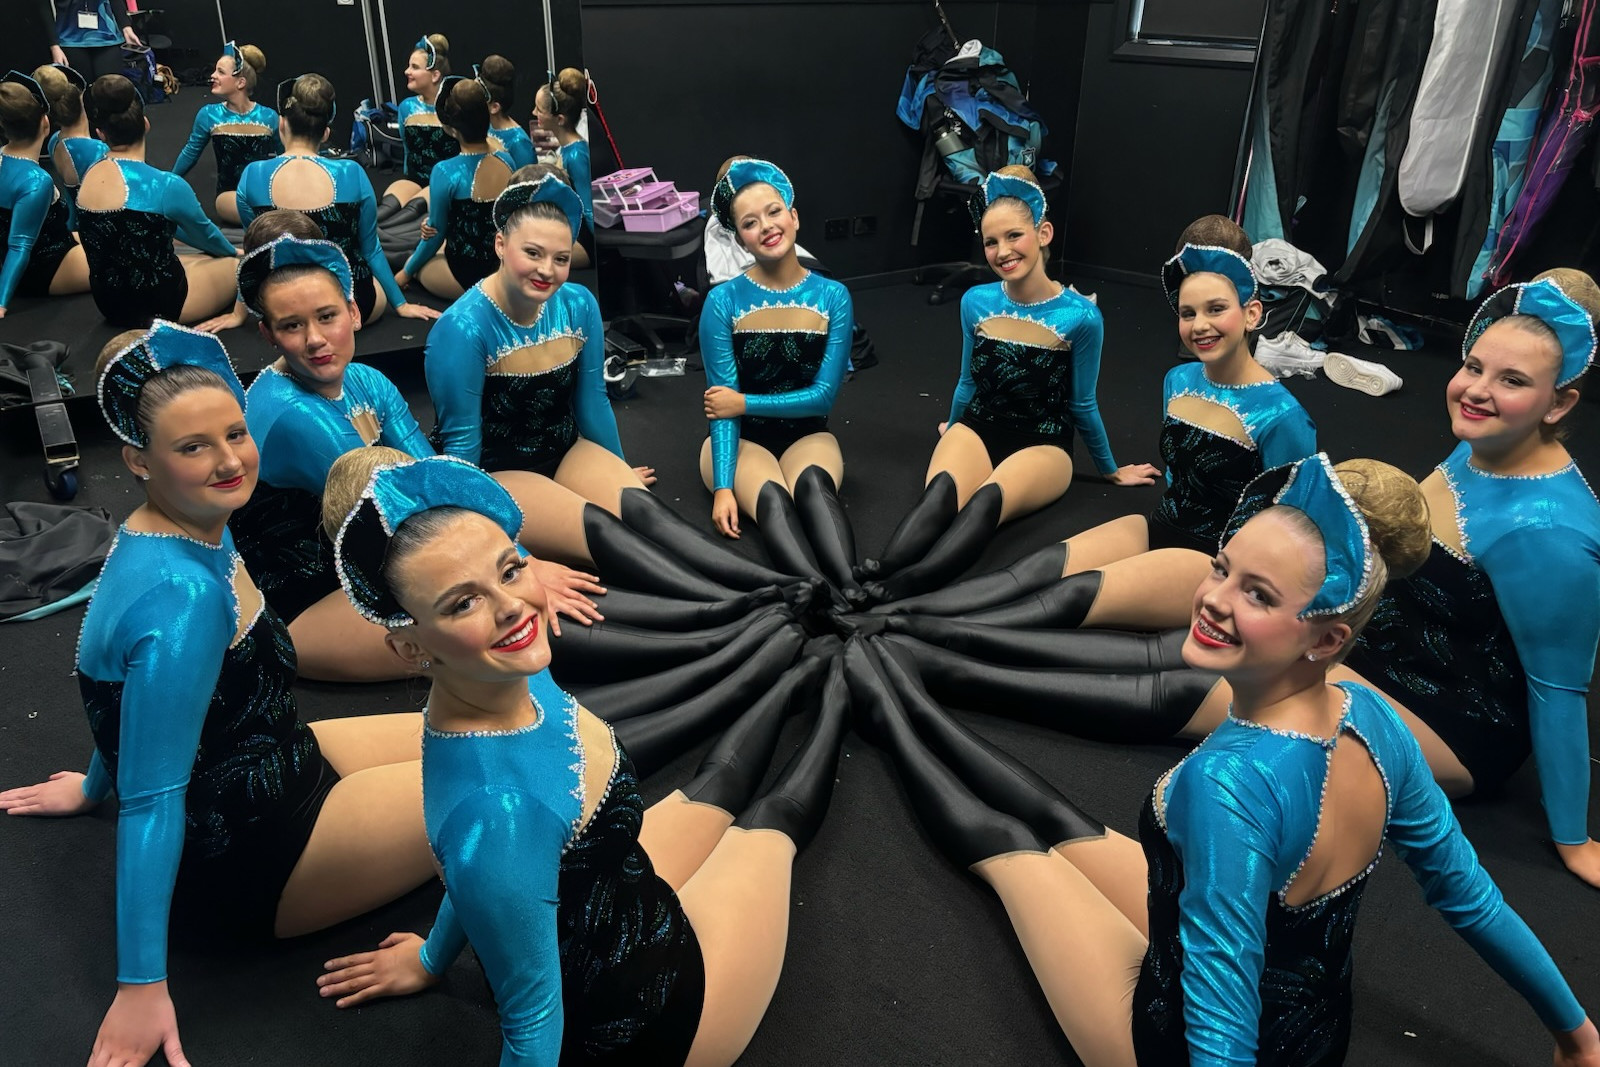 The girls get ready to take to the stage for their March routine.